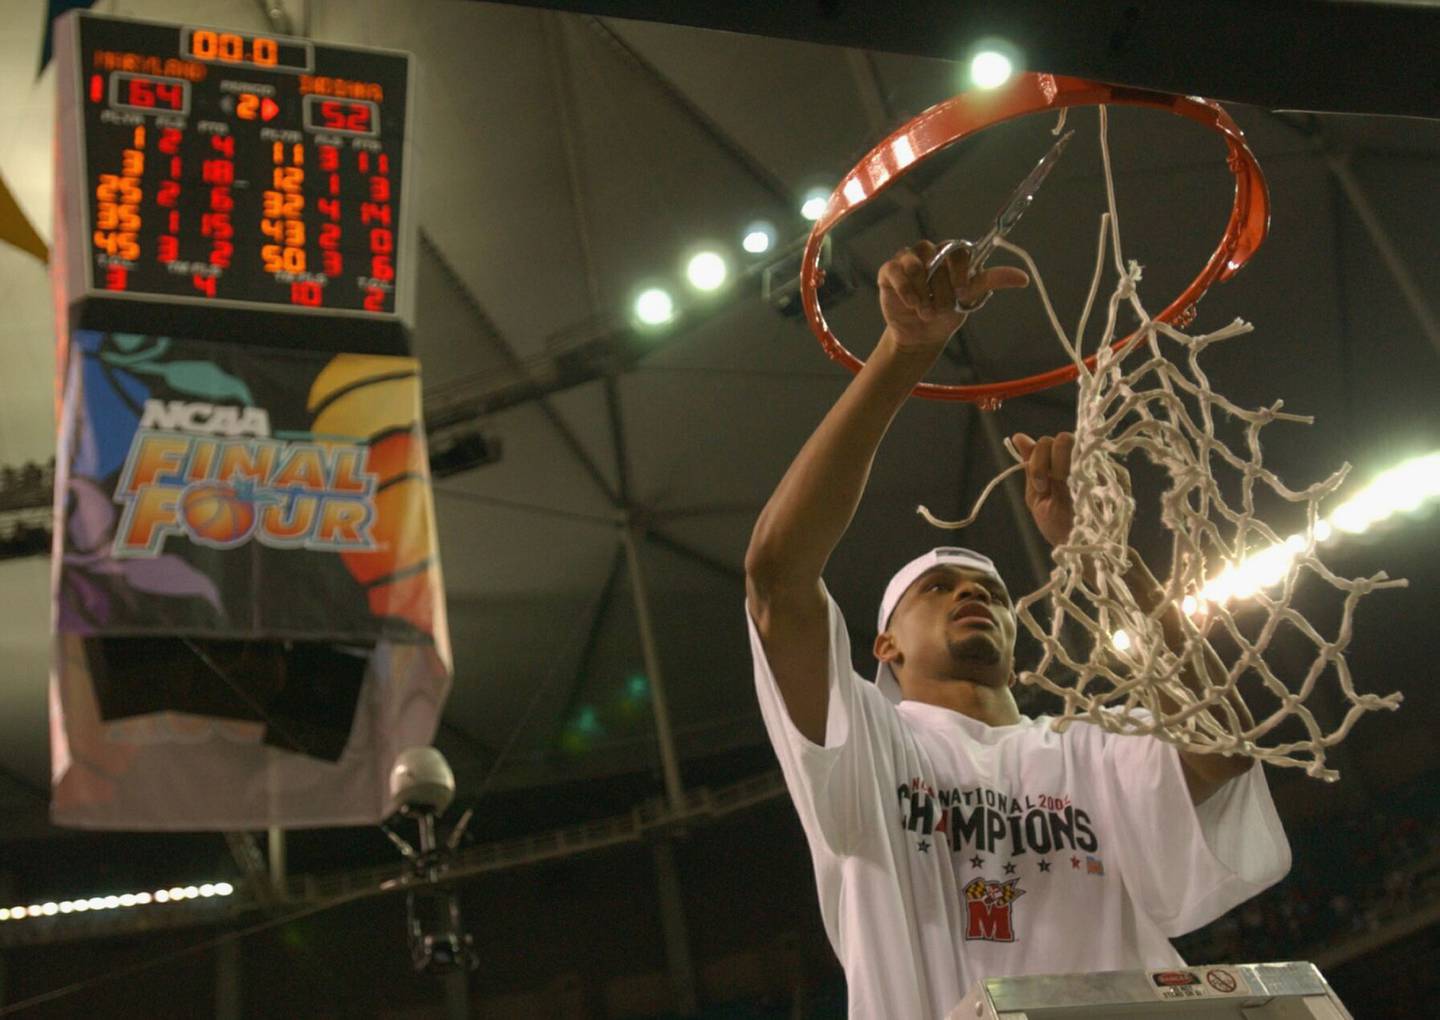 ATLANTA, GA - APRIL 1:  Juan Dixon #3 of the University of Maryland Terrapins celebrates by cutting down the net after the men's NCAA National Championship game against the Indiana University Hoosiers at the Georgia Dome in Atlanta, Georgia on April 1, 2002.  Maryland defeated Indiana 64-52 winning the National Championship.